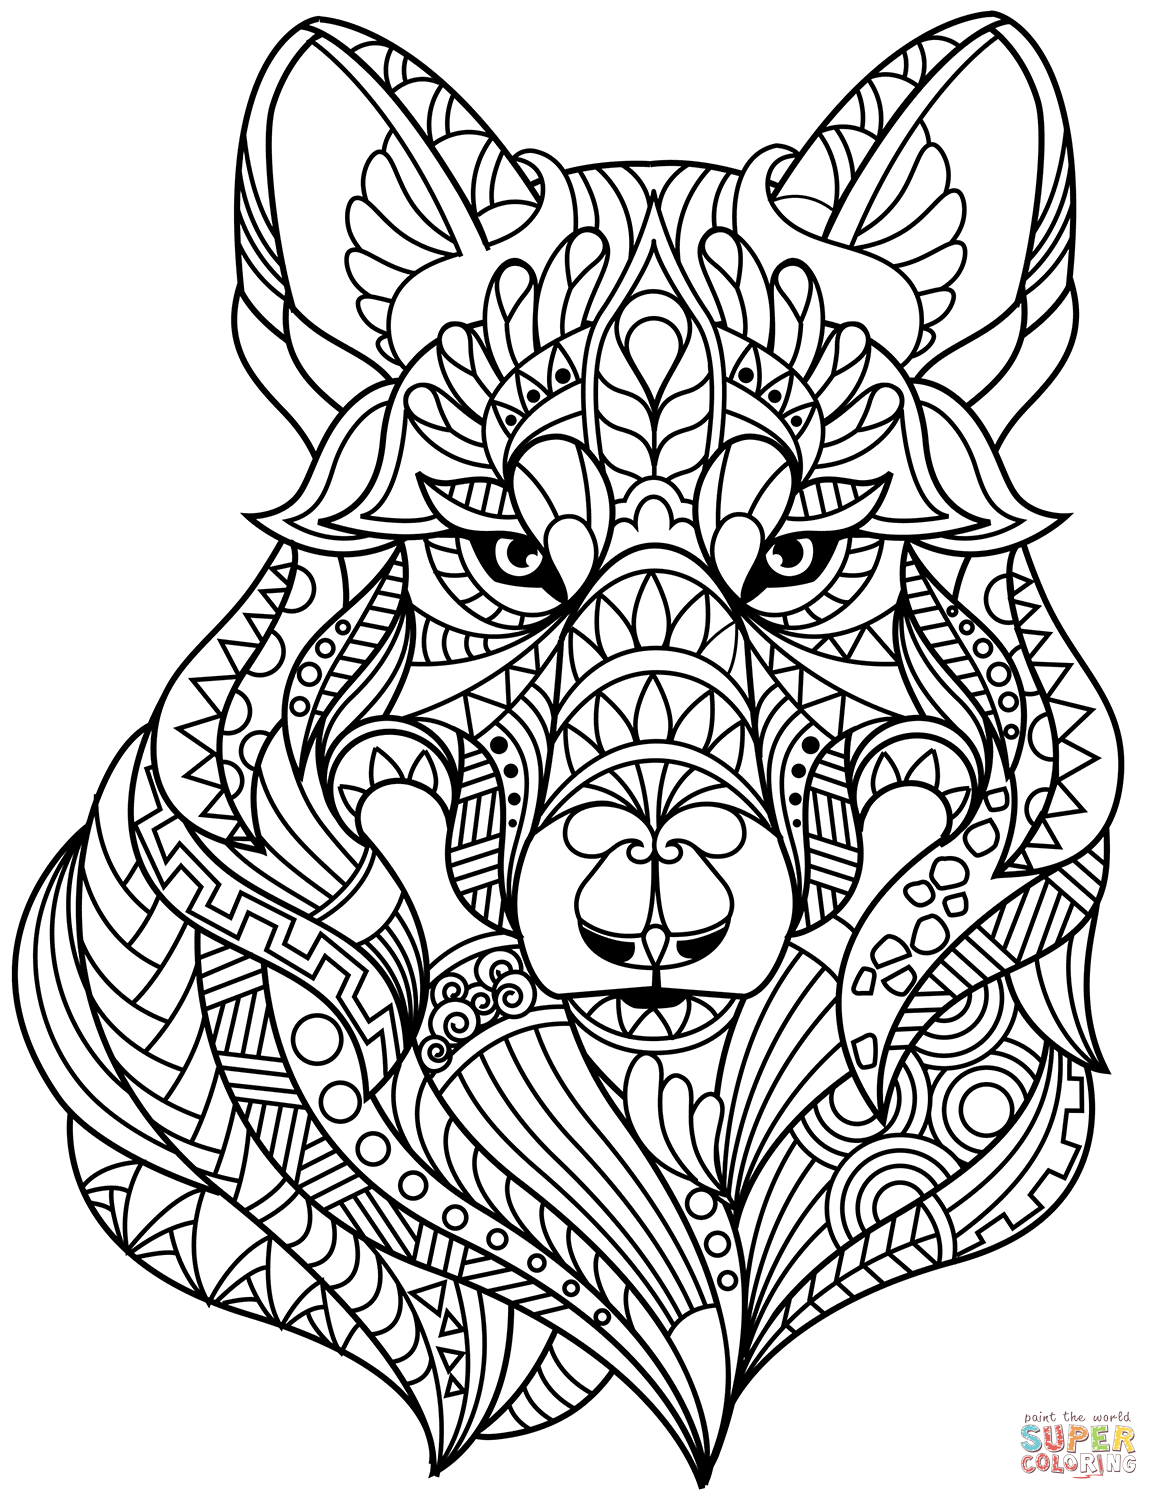 Wolf head zentangle coloring page from zentangle category select from printable craâ animal coloring pages mandala coloring pages abstract coloring pages